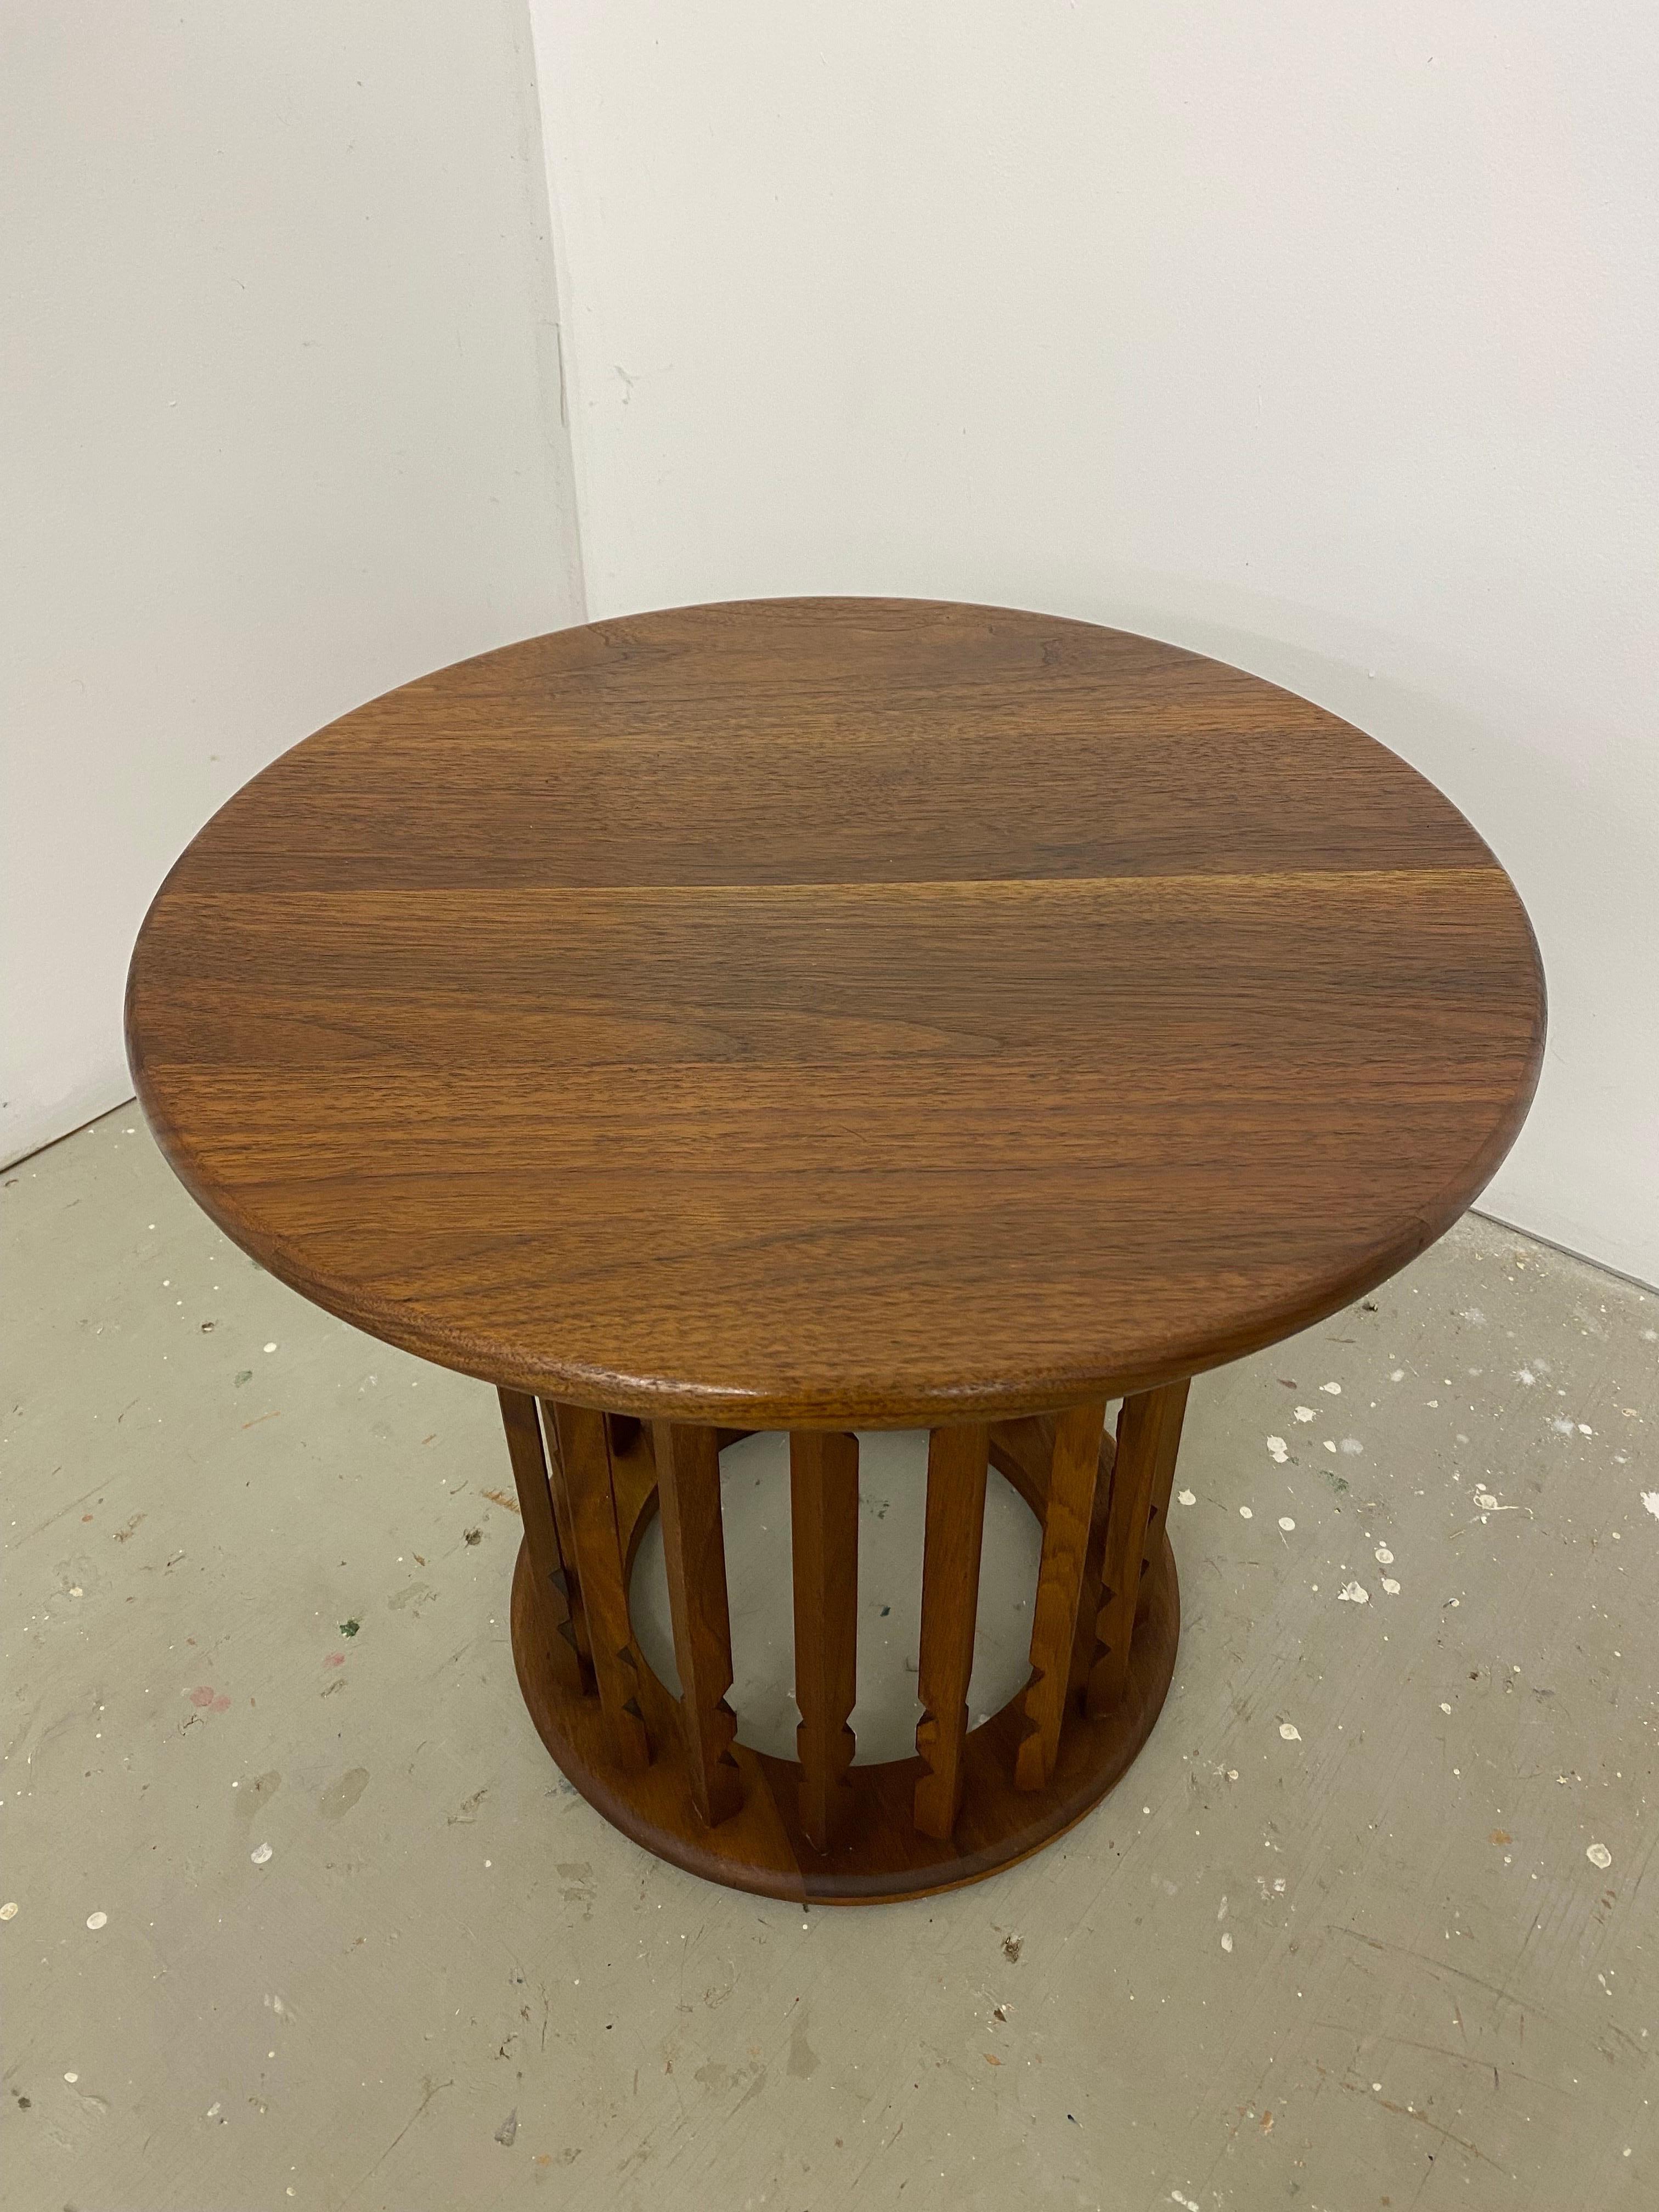 Arthur Umanoff for Washington Woodcraft.  Solid Walnut Round Table with 3-sided knotched dowels that form the support.  Nice size and in very good condition.  Perfect to use in any room, next to a chair towels in the bathroom!